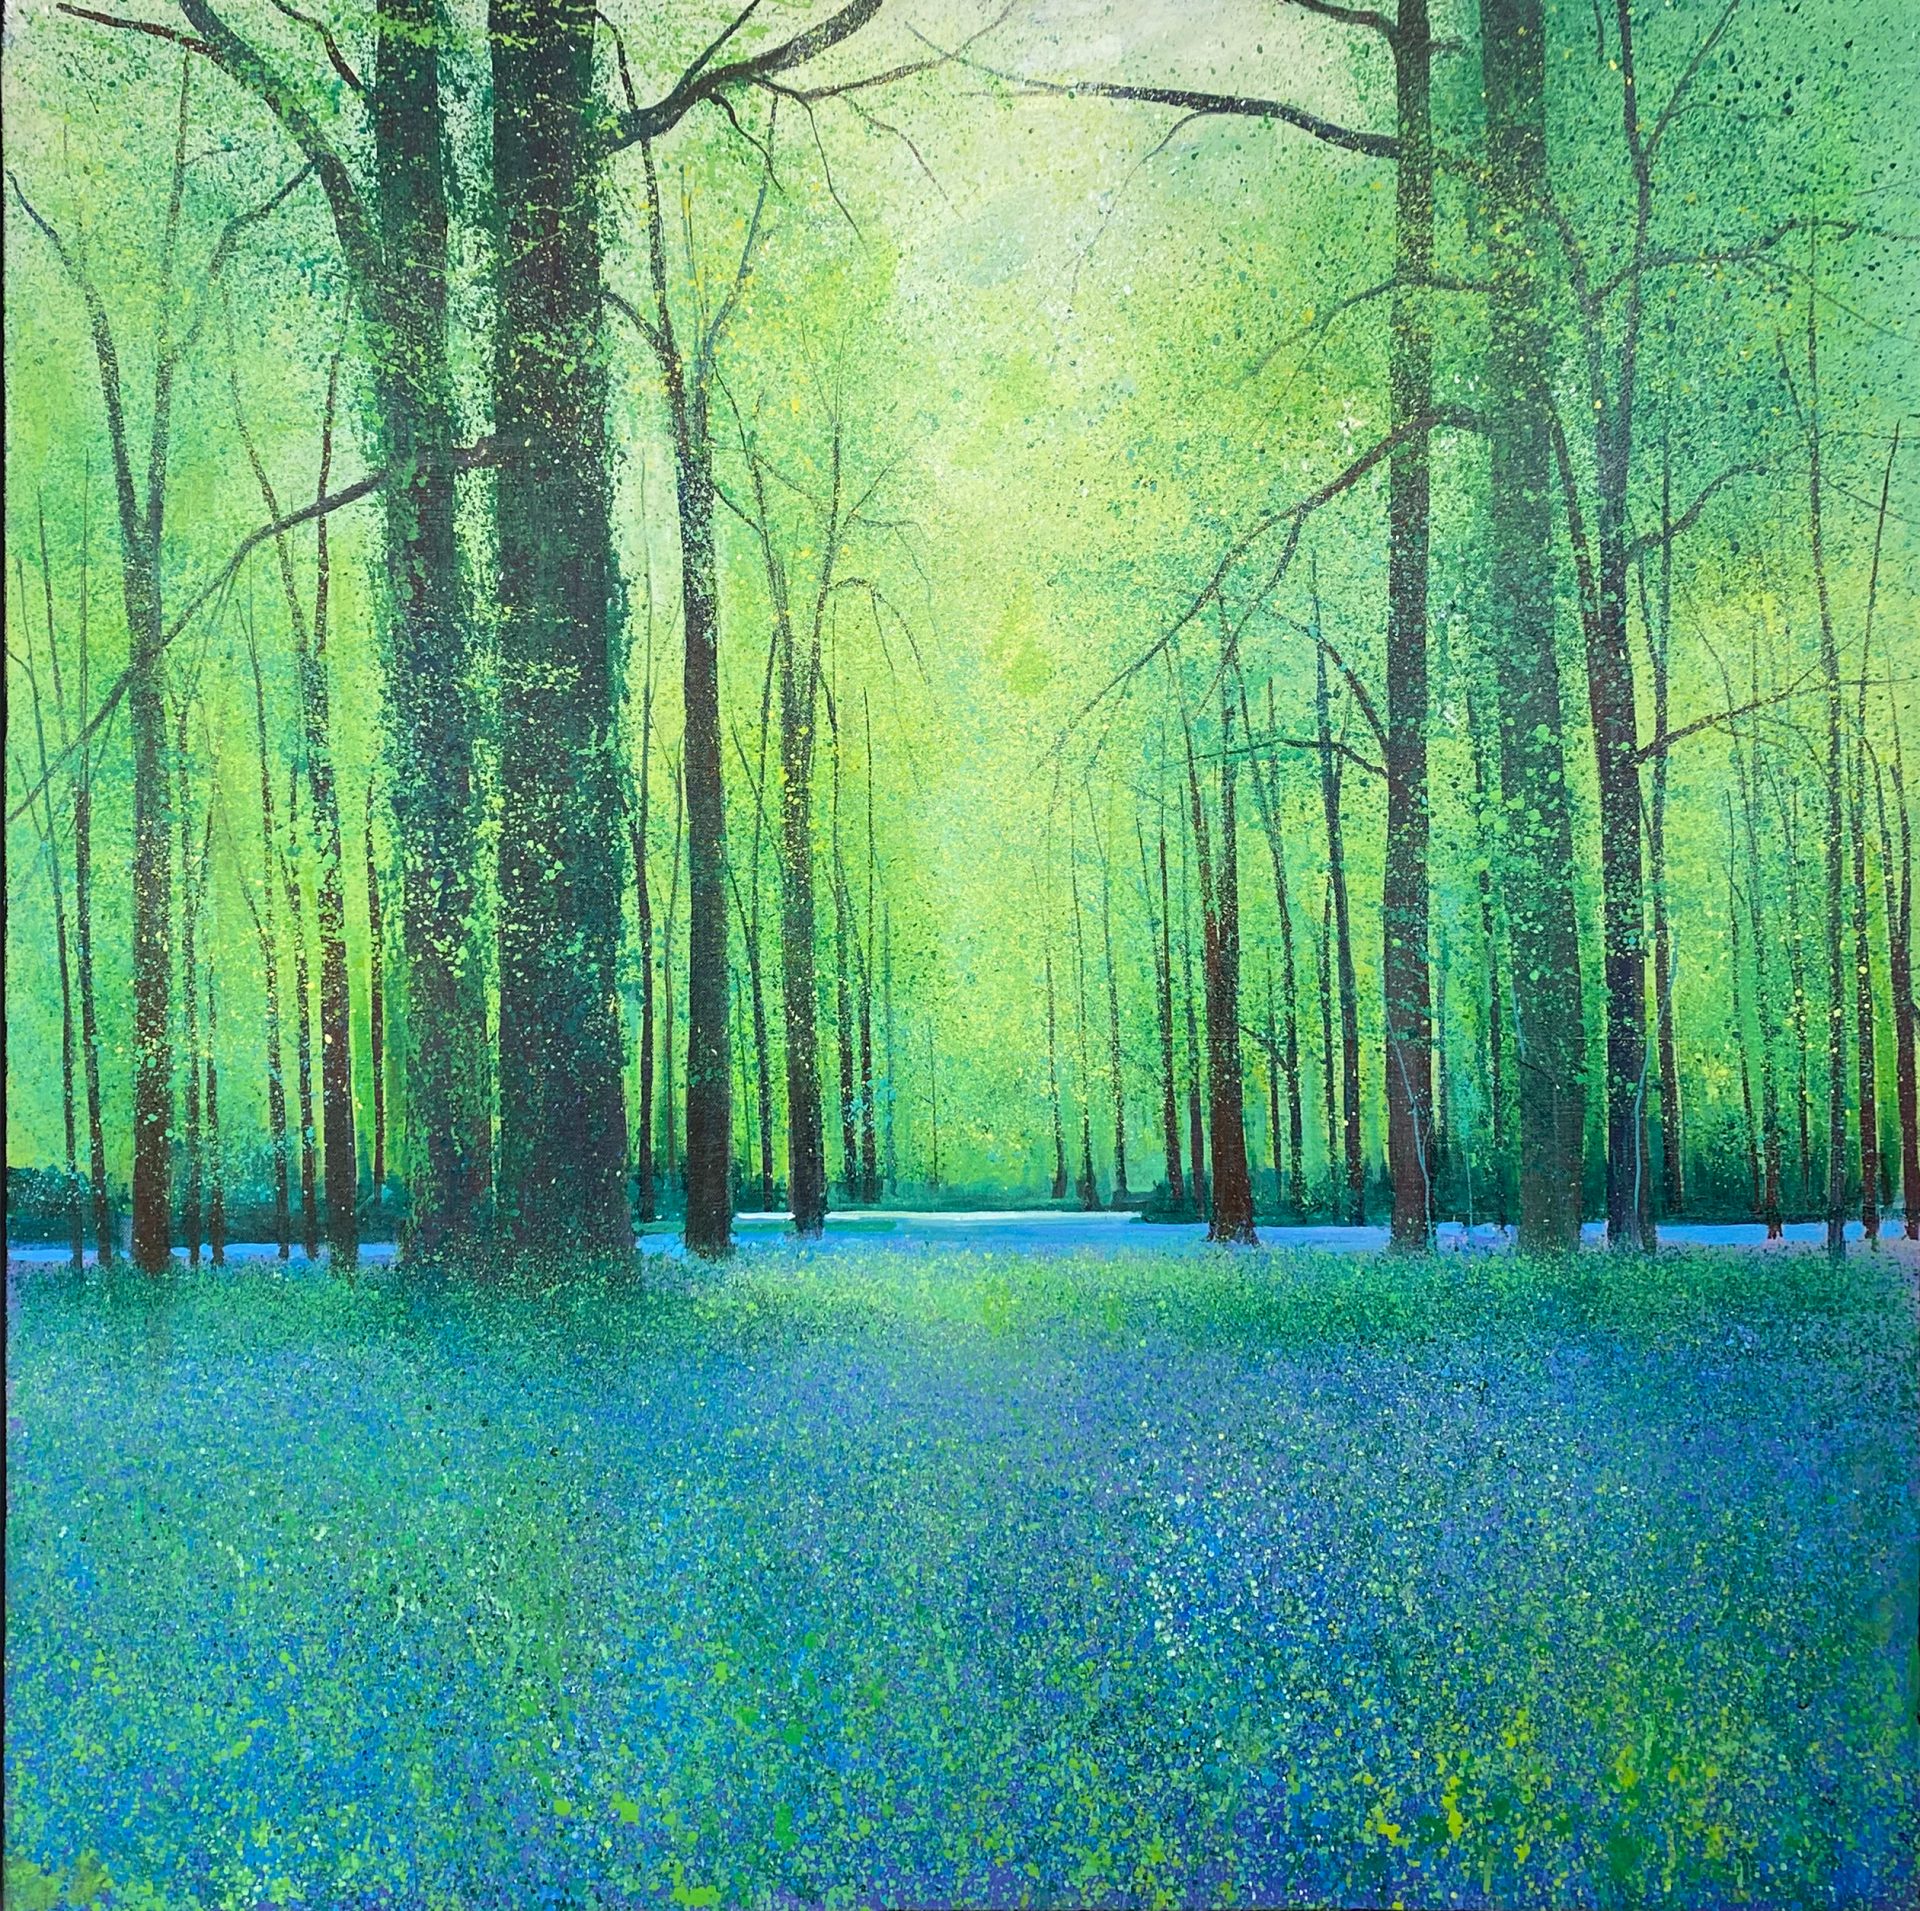 John Connolly The Magic of Spring Hampshire Bluebells Art springtime bluebells forest painting with green trees and blue flowers in modern painting artwork style